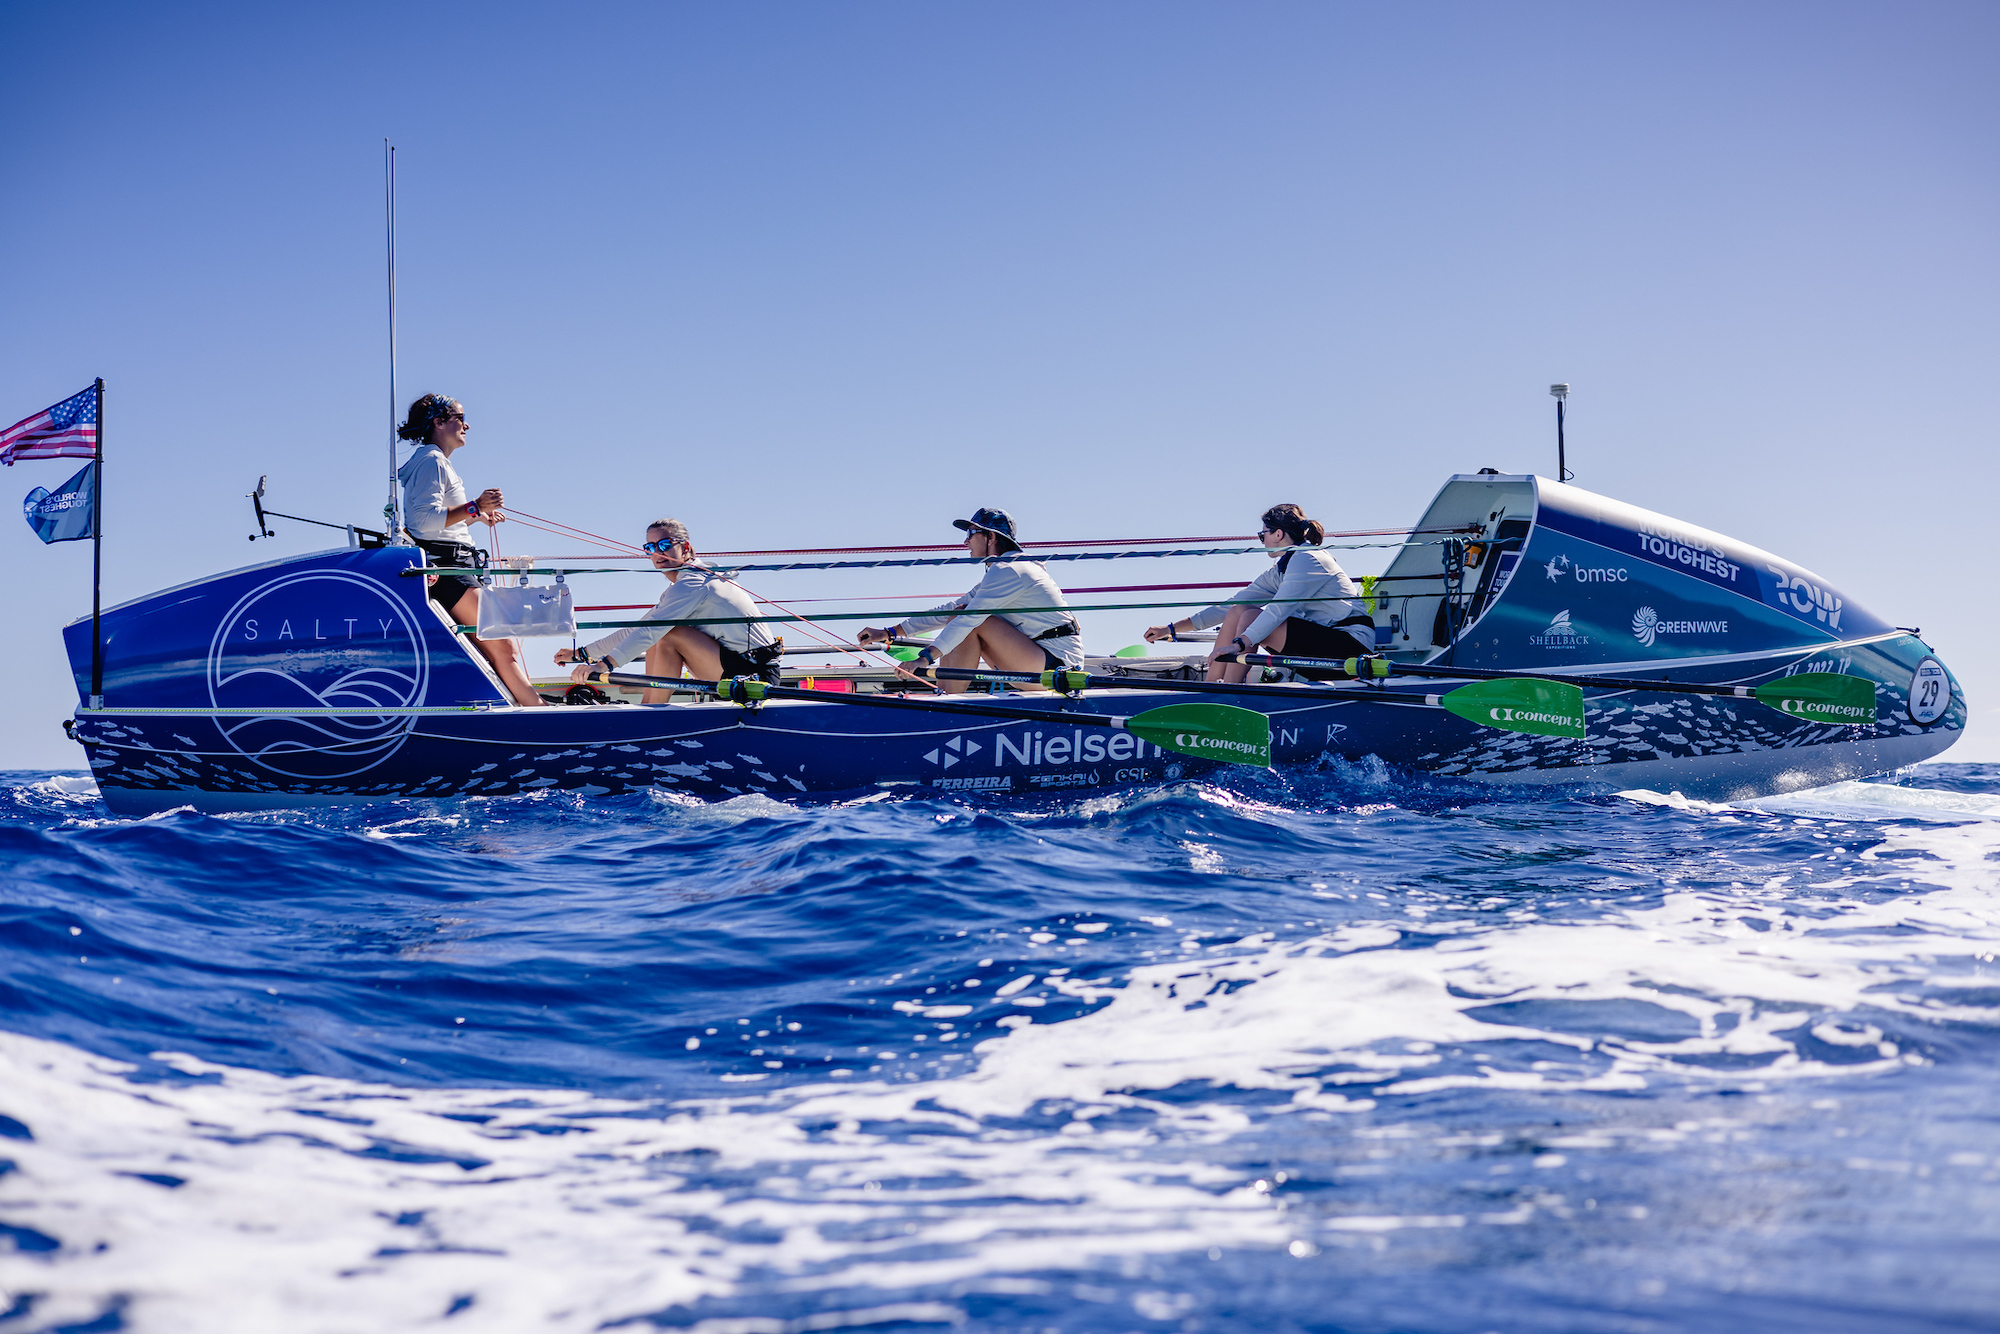 Four women, three rowing and one steering, propel a boat across ocean waves.